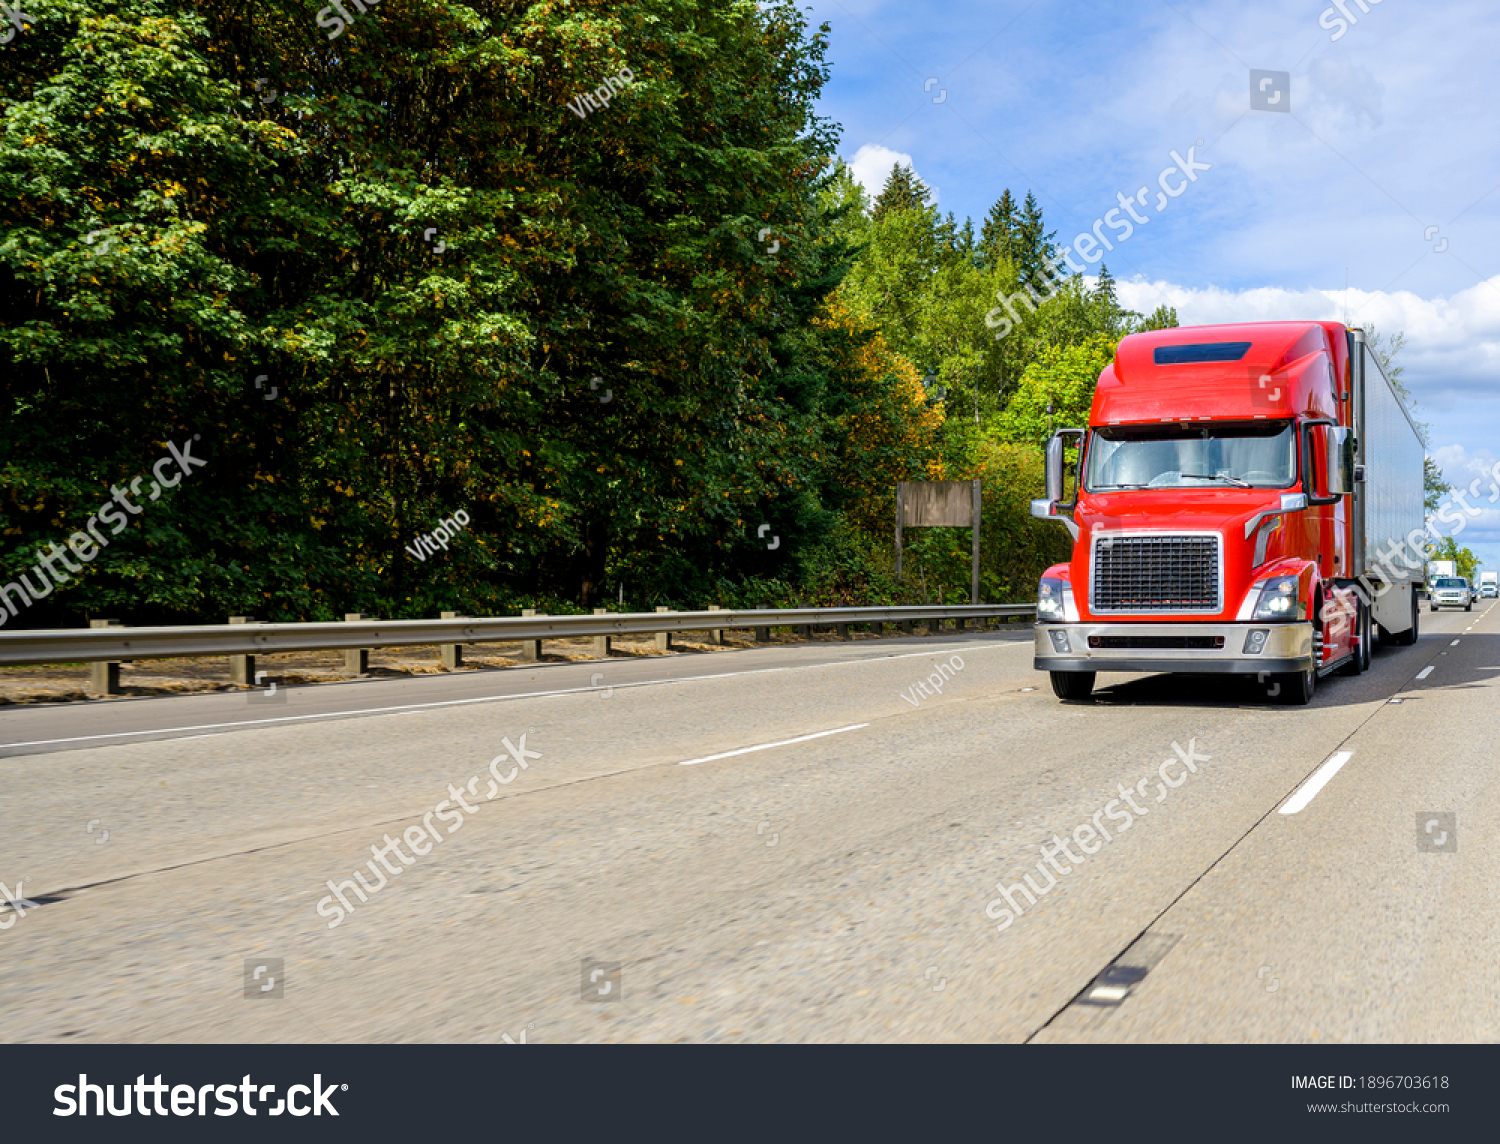 Red big rig industrial grade bonnet long hauler diesel semi truck with high roof cab and refrigerator semi trailer running with commercial cargo on the wide highway road with green trees hillside #1896703618